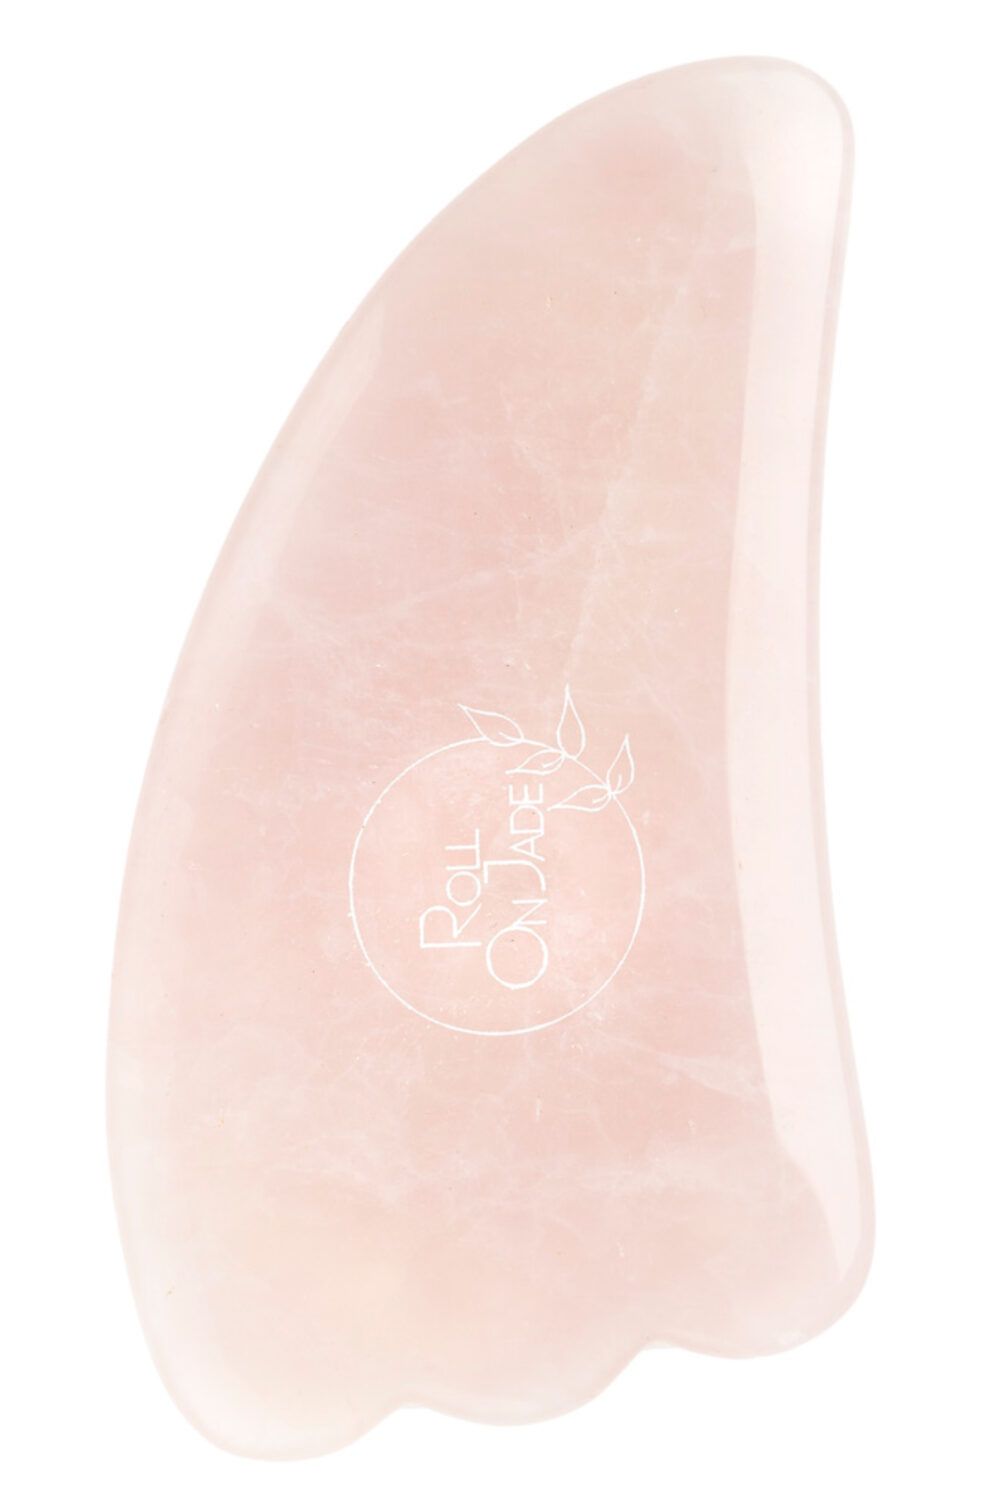 Roll-on Jade - Gua Sha touch' lift